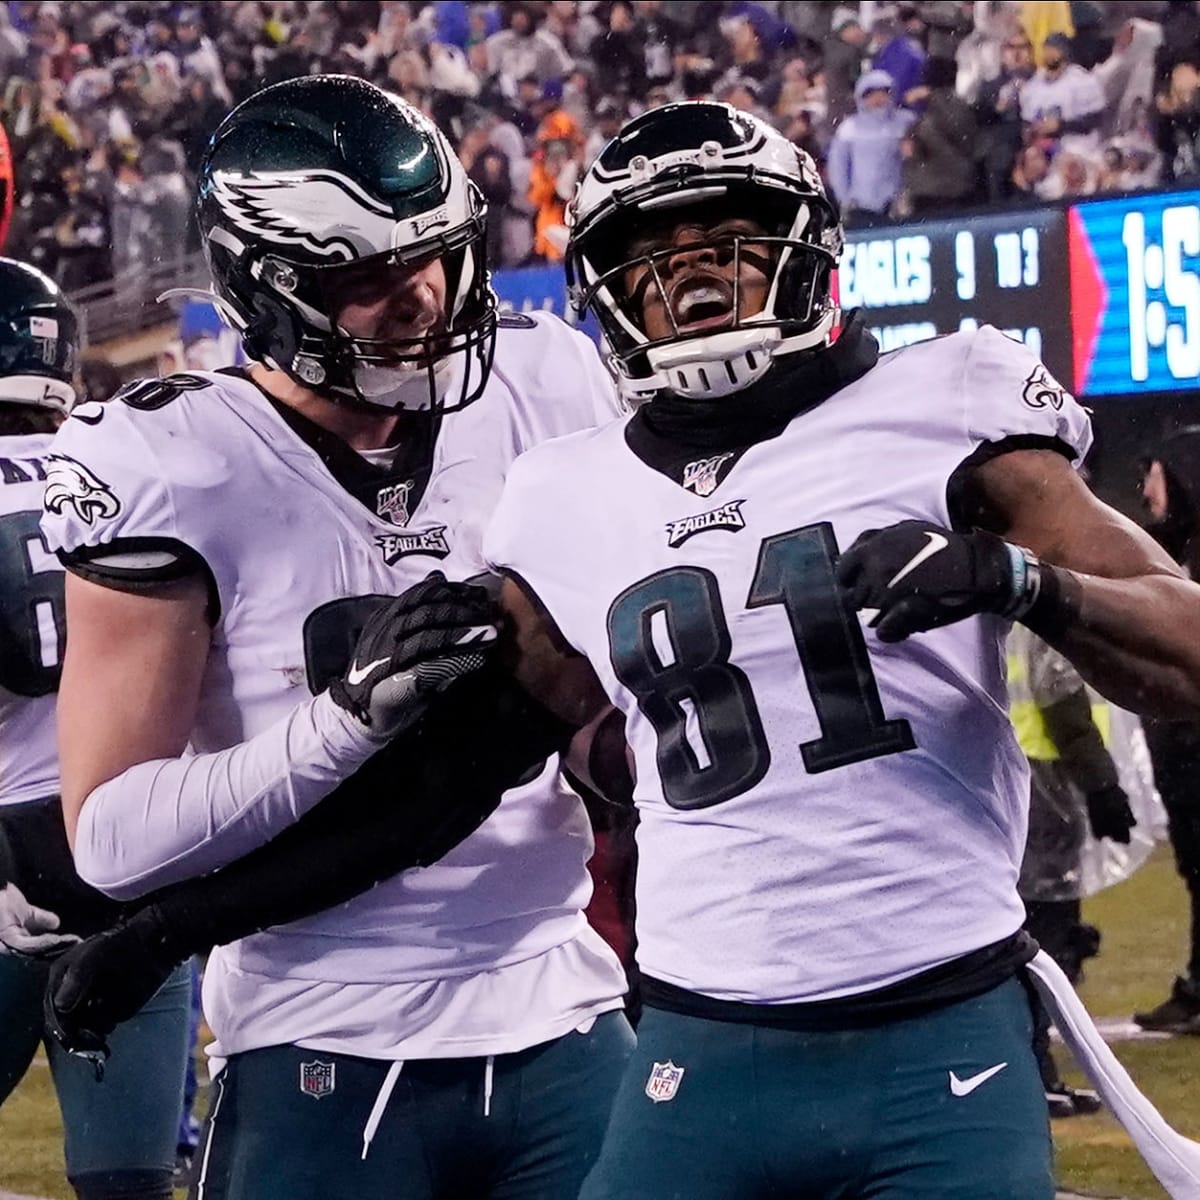 NFC East Preview: Super Bowl Slump For The Eagles? Giants Winning